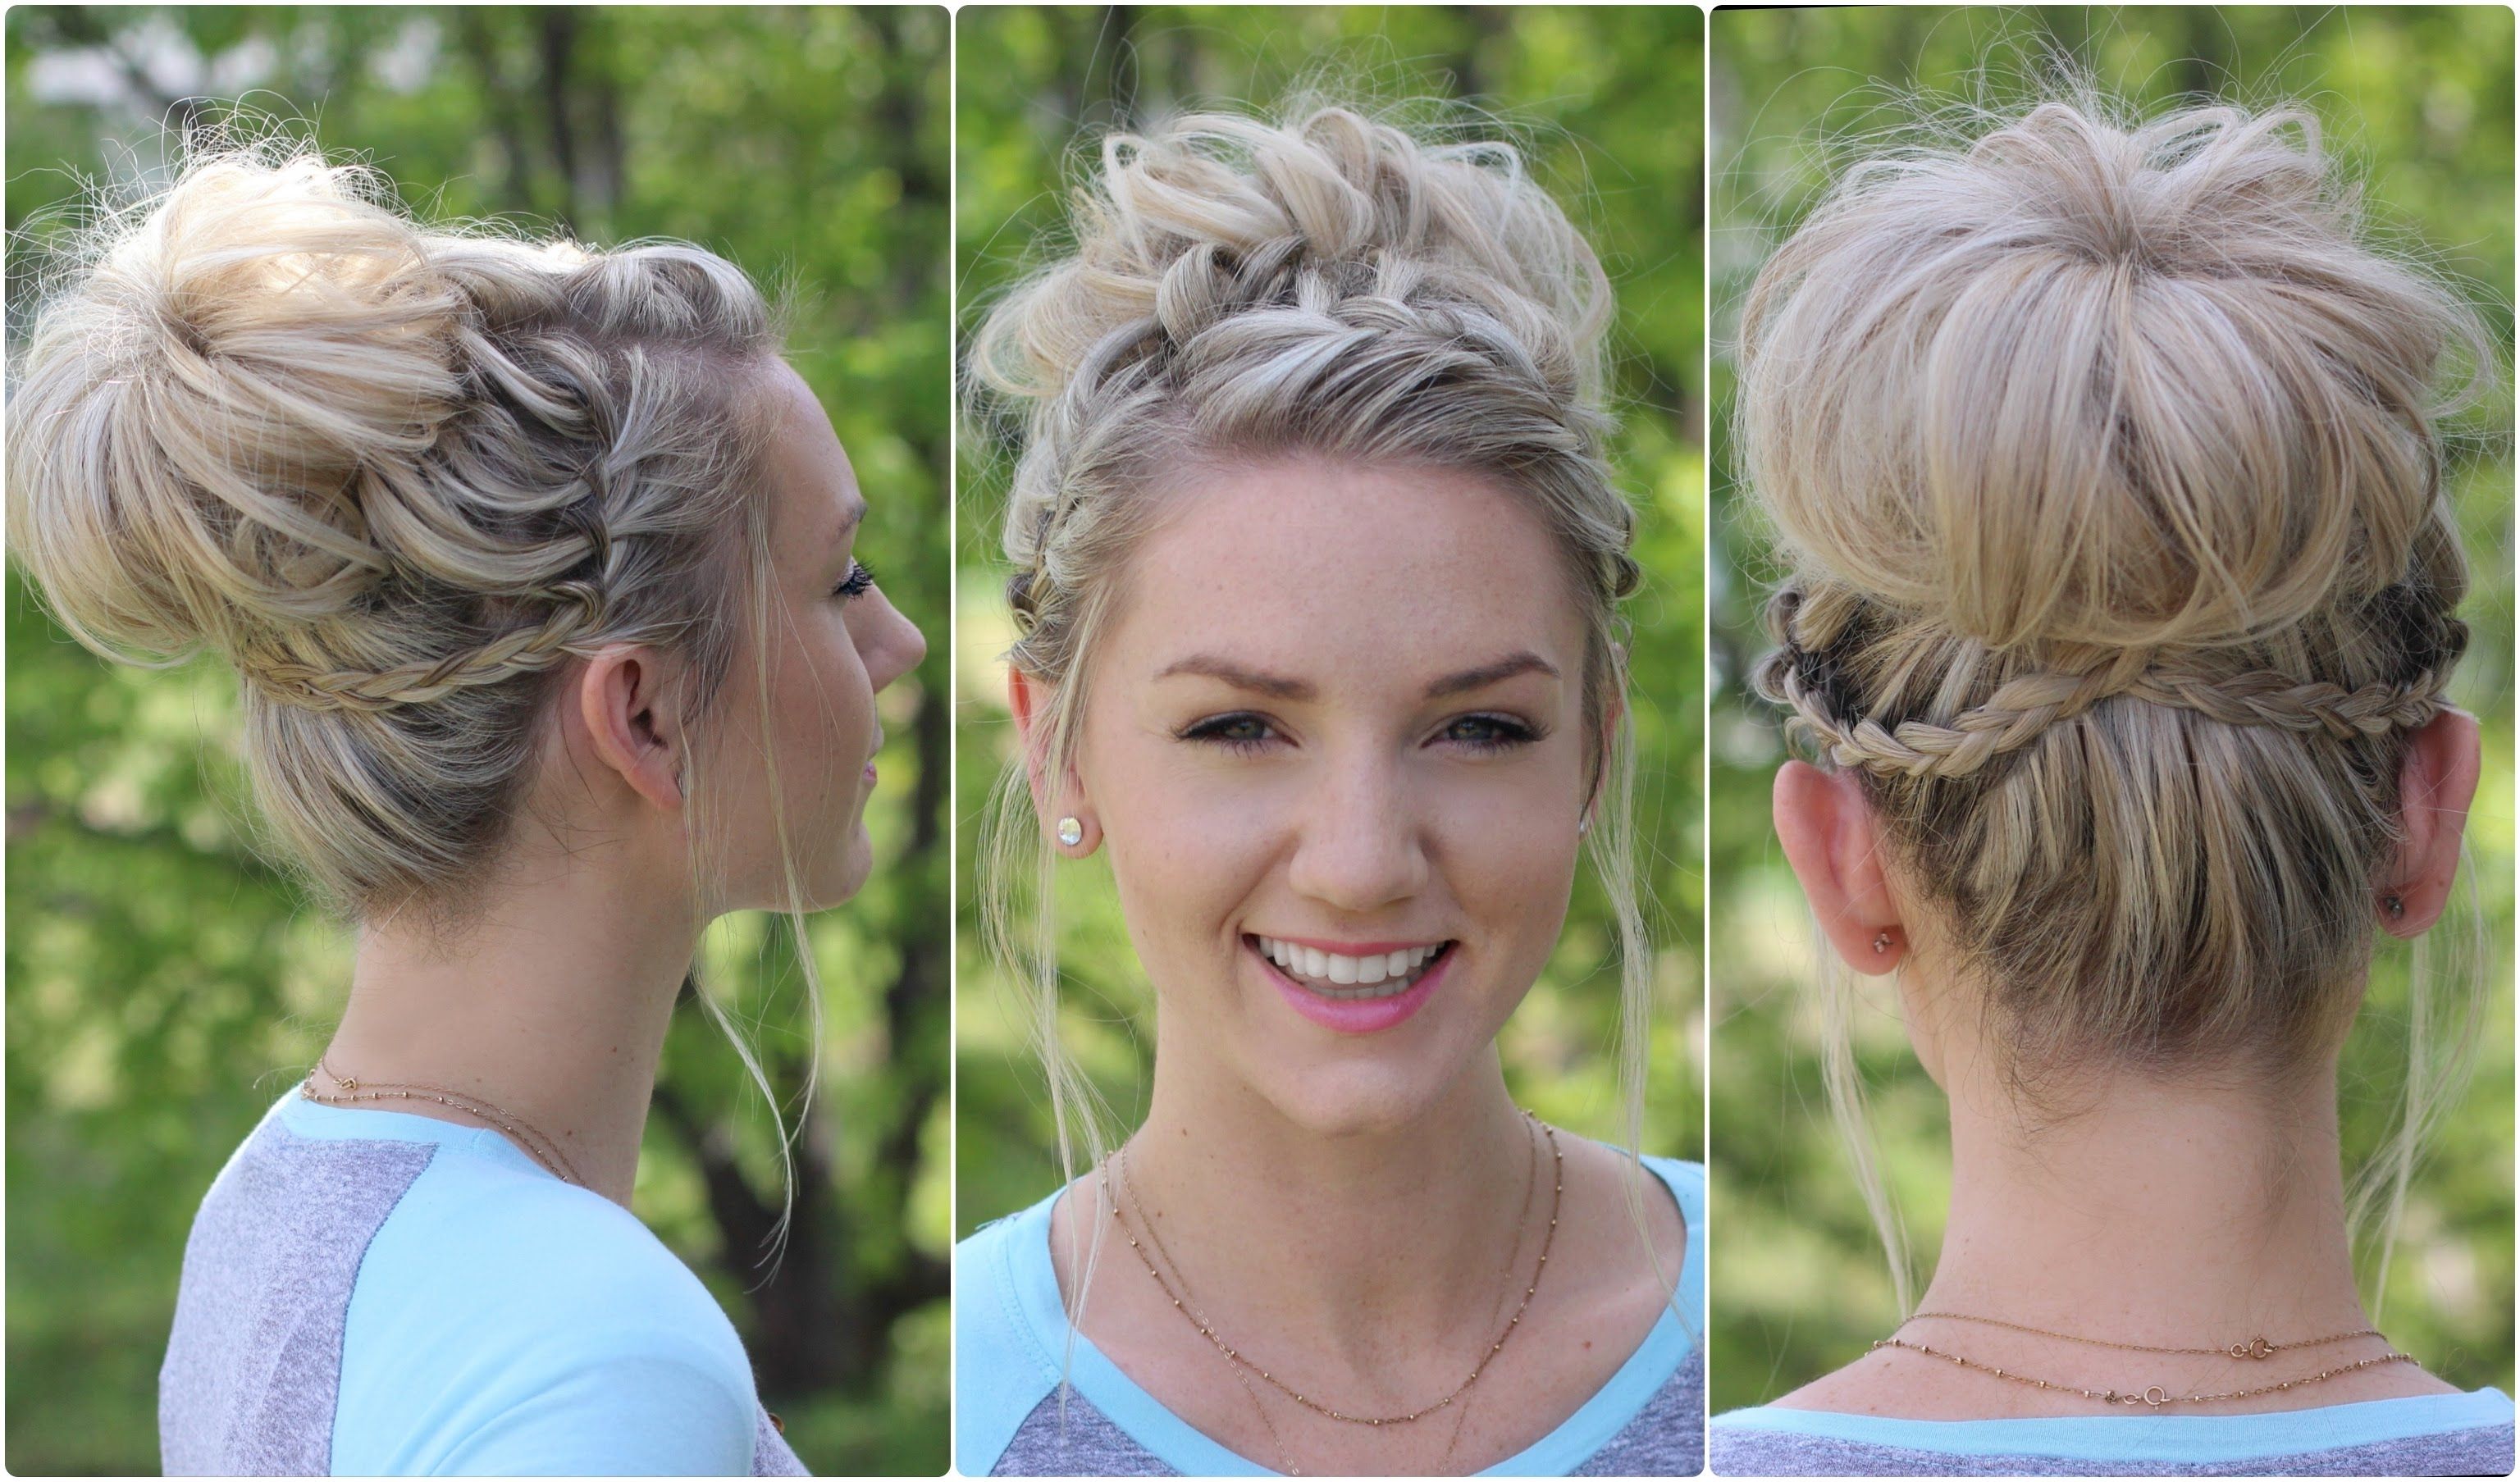 Waterfall Bun | Updo | Cute Girls Hairstyles – Youtube Intended For Updo Hairstyles For Teenager (View 3 of 15)